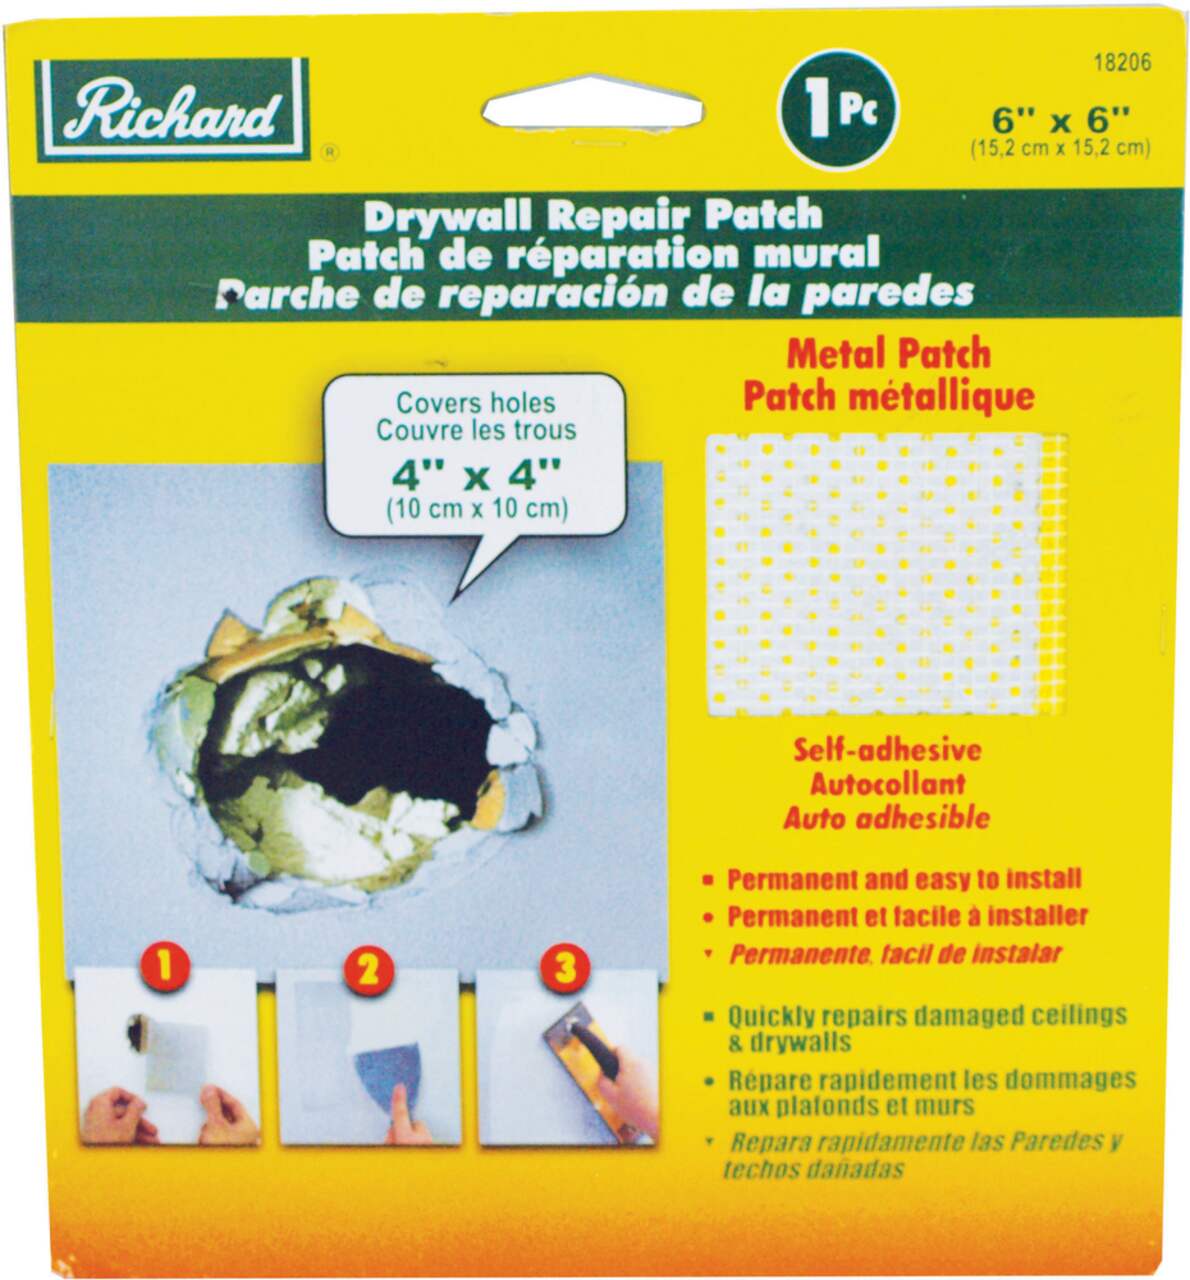 https://media-www.canadiantire.ca/product/fixing/paint/surface-prep-maintenance/0495074/wall-repair-patch-6--d4e22e27-8198-4ffb-9229-ec0443fd473c.png?imdensity=1&imwidth=640&impolicy=mZoom